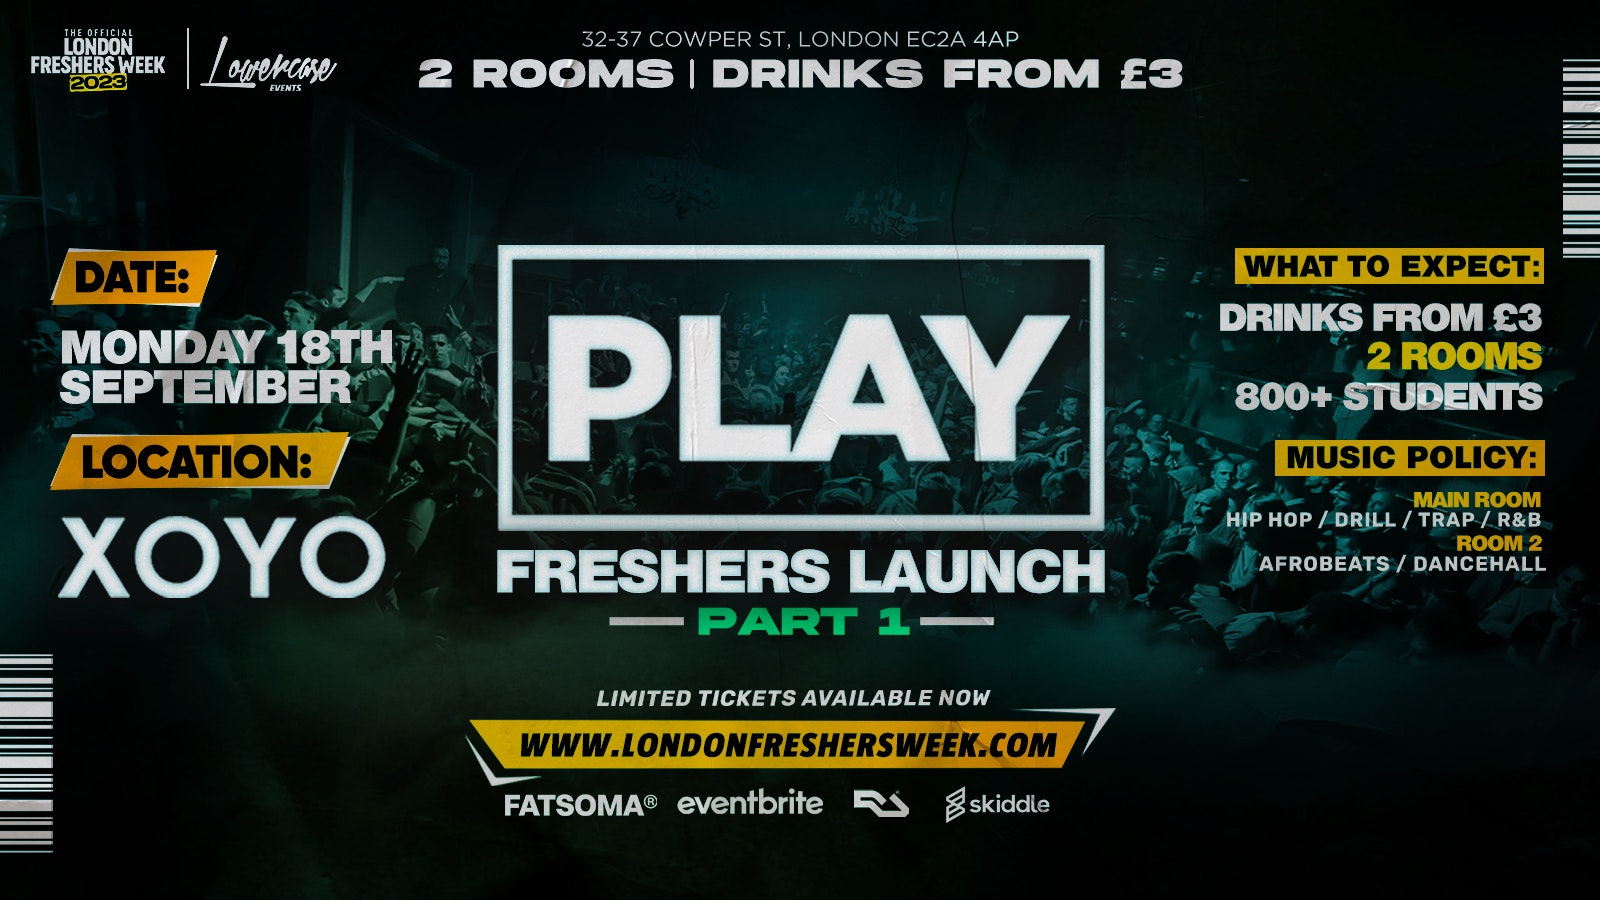 ⚠️ FRESHERS LAUNCH PART 1 ⚠️ Play London Every Monday At XOYO – The Biggest Weekly Monday Student Night